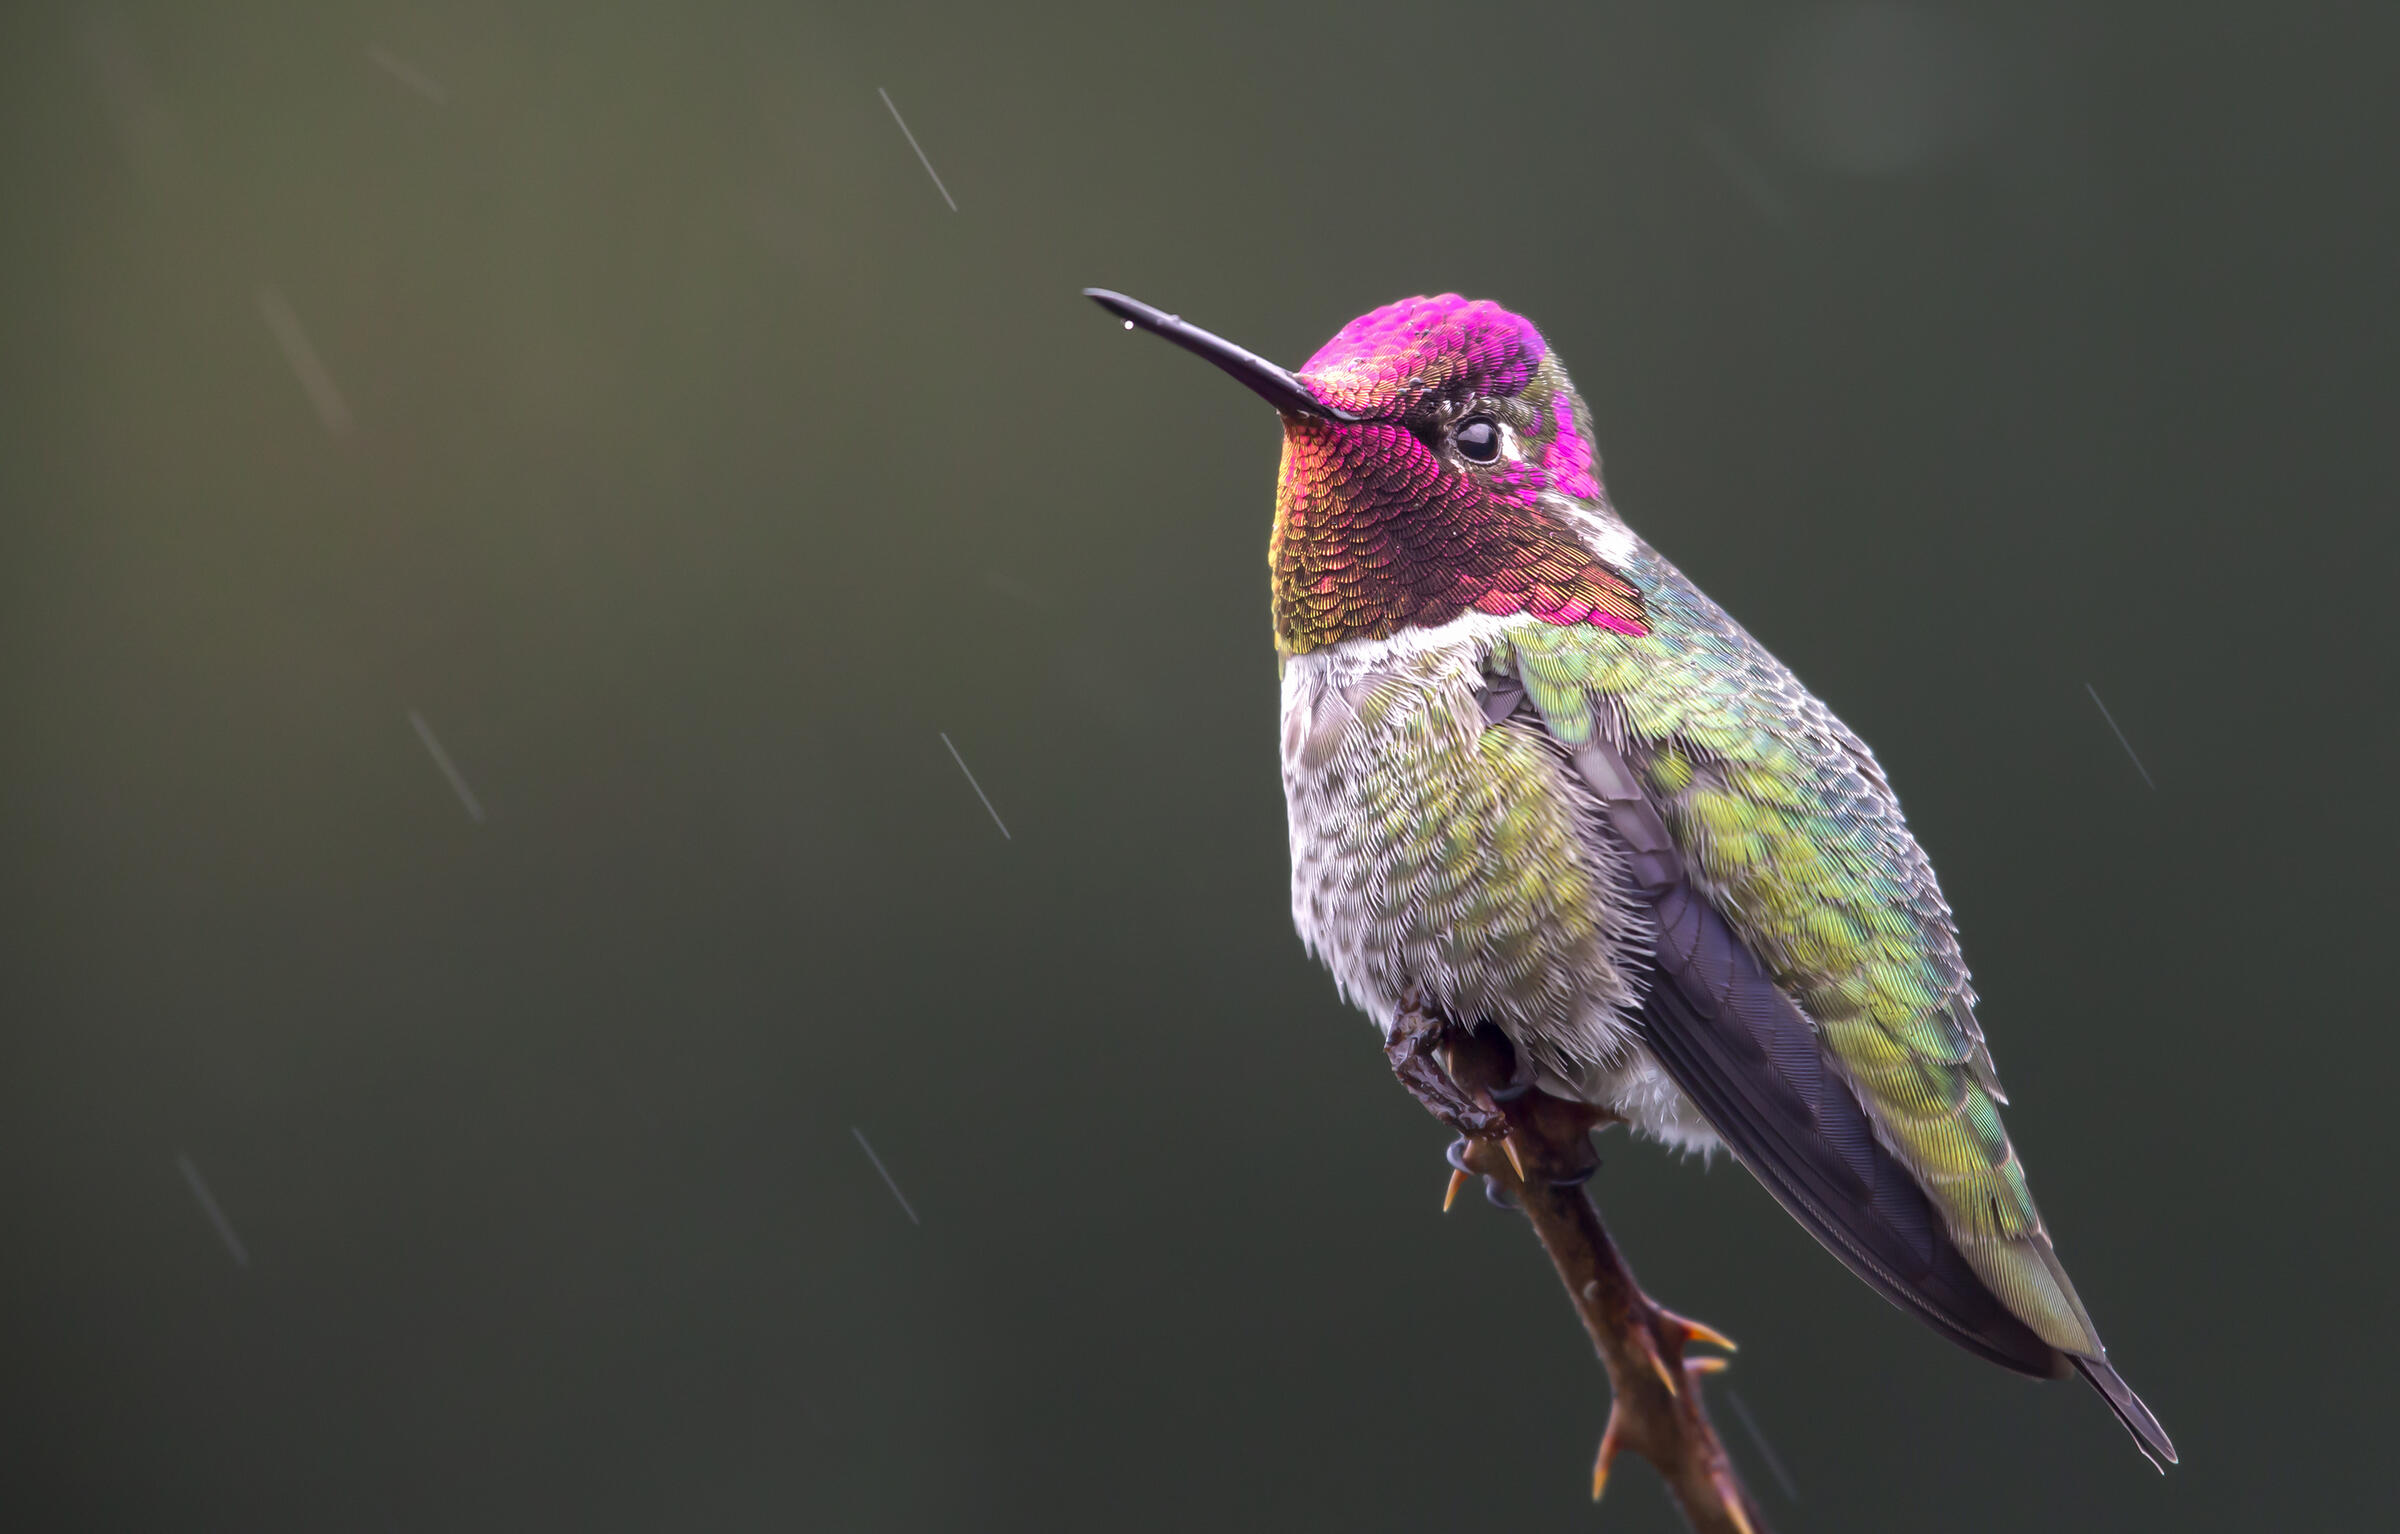 A male Anna's Hummingbird, with an iridescent pink throat, perches on a thorny branch in the rain.